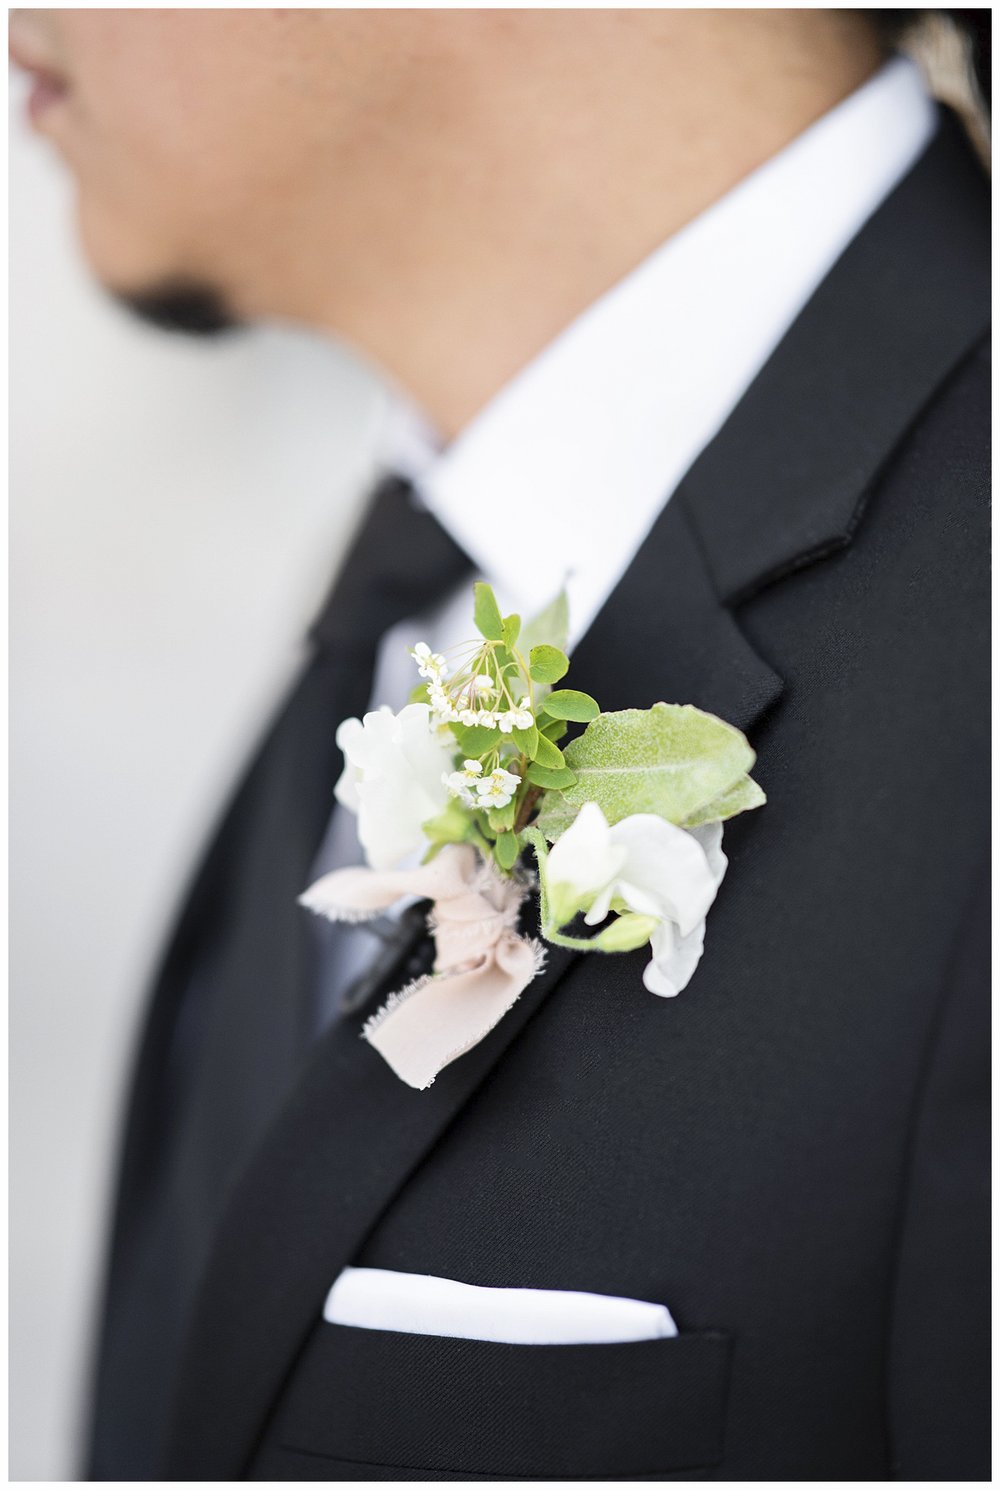 close up of boutonniere on black suit of groom